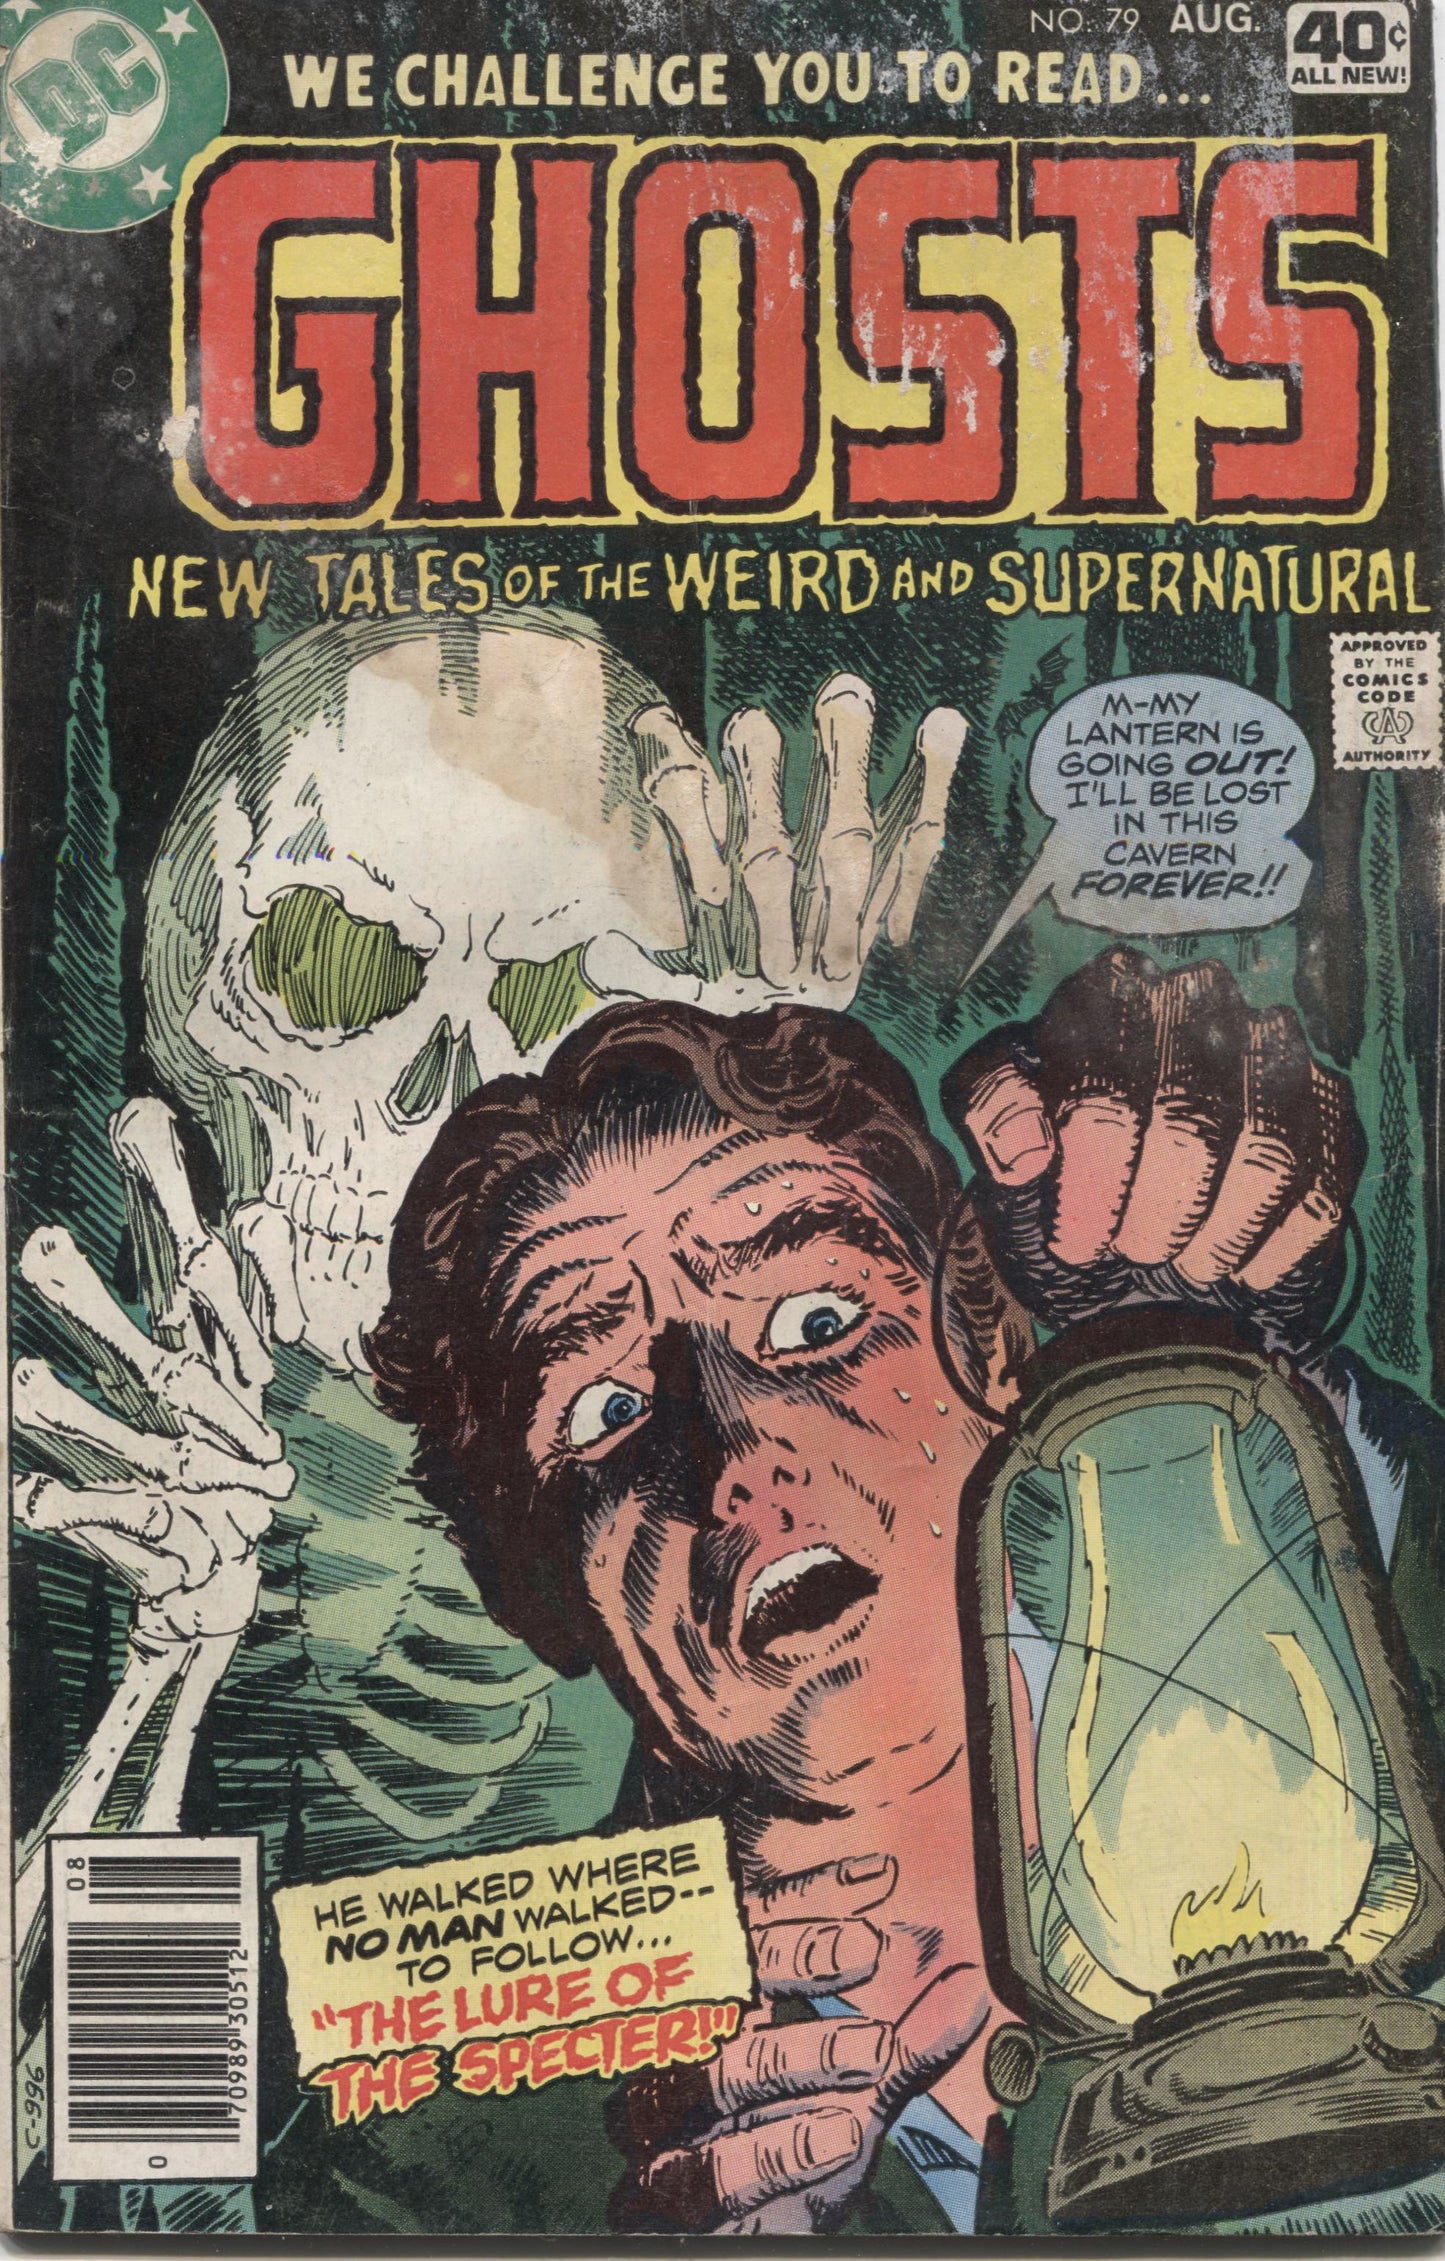 Ghosts No. 79, "The Lure of the Specter," DC Comics, August 1979